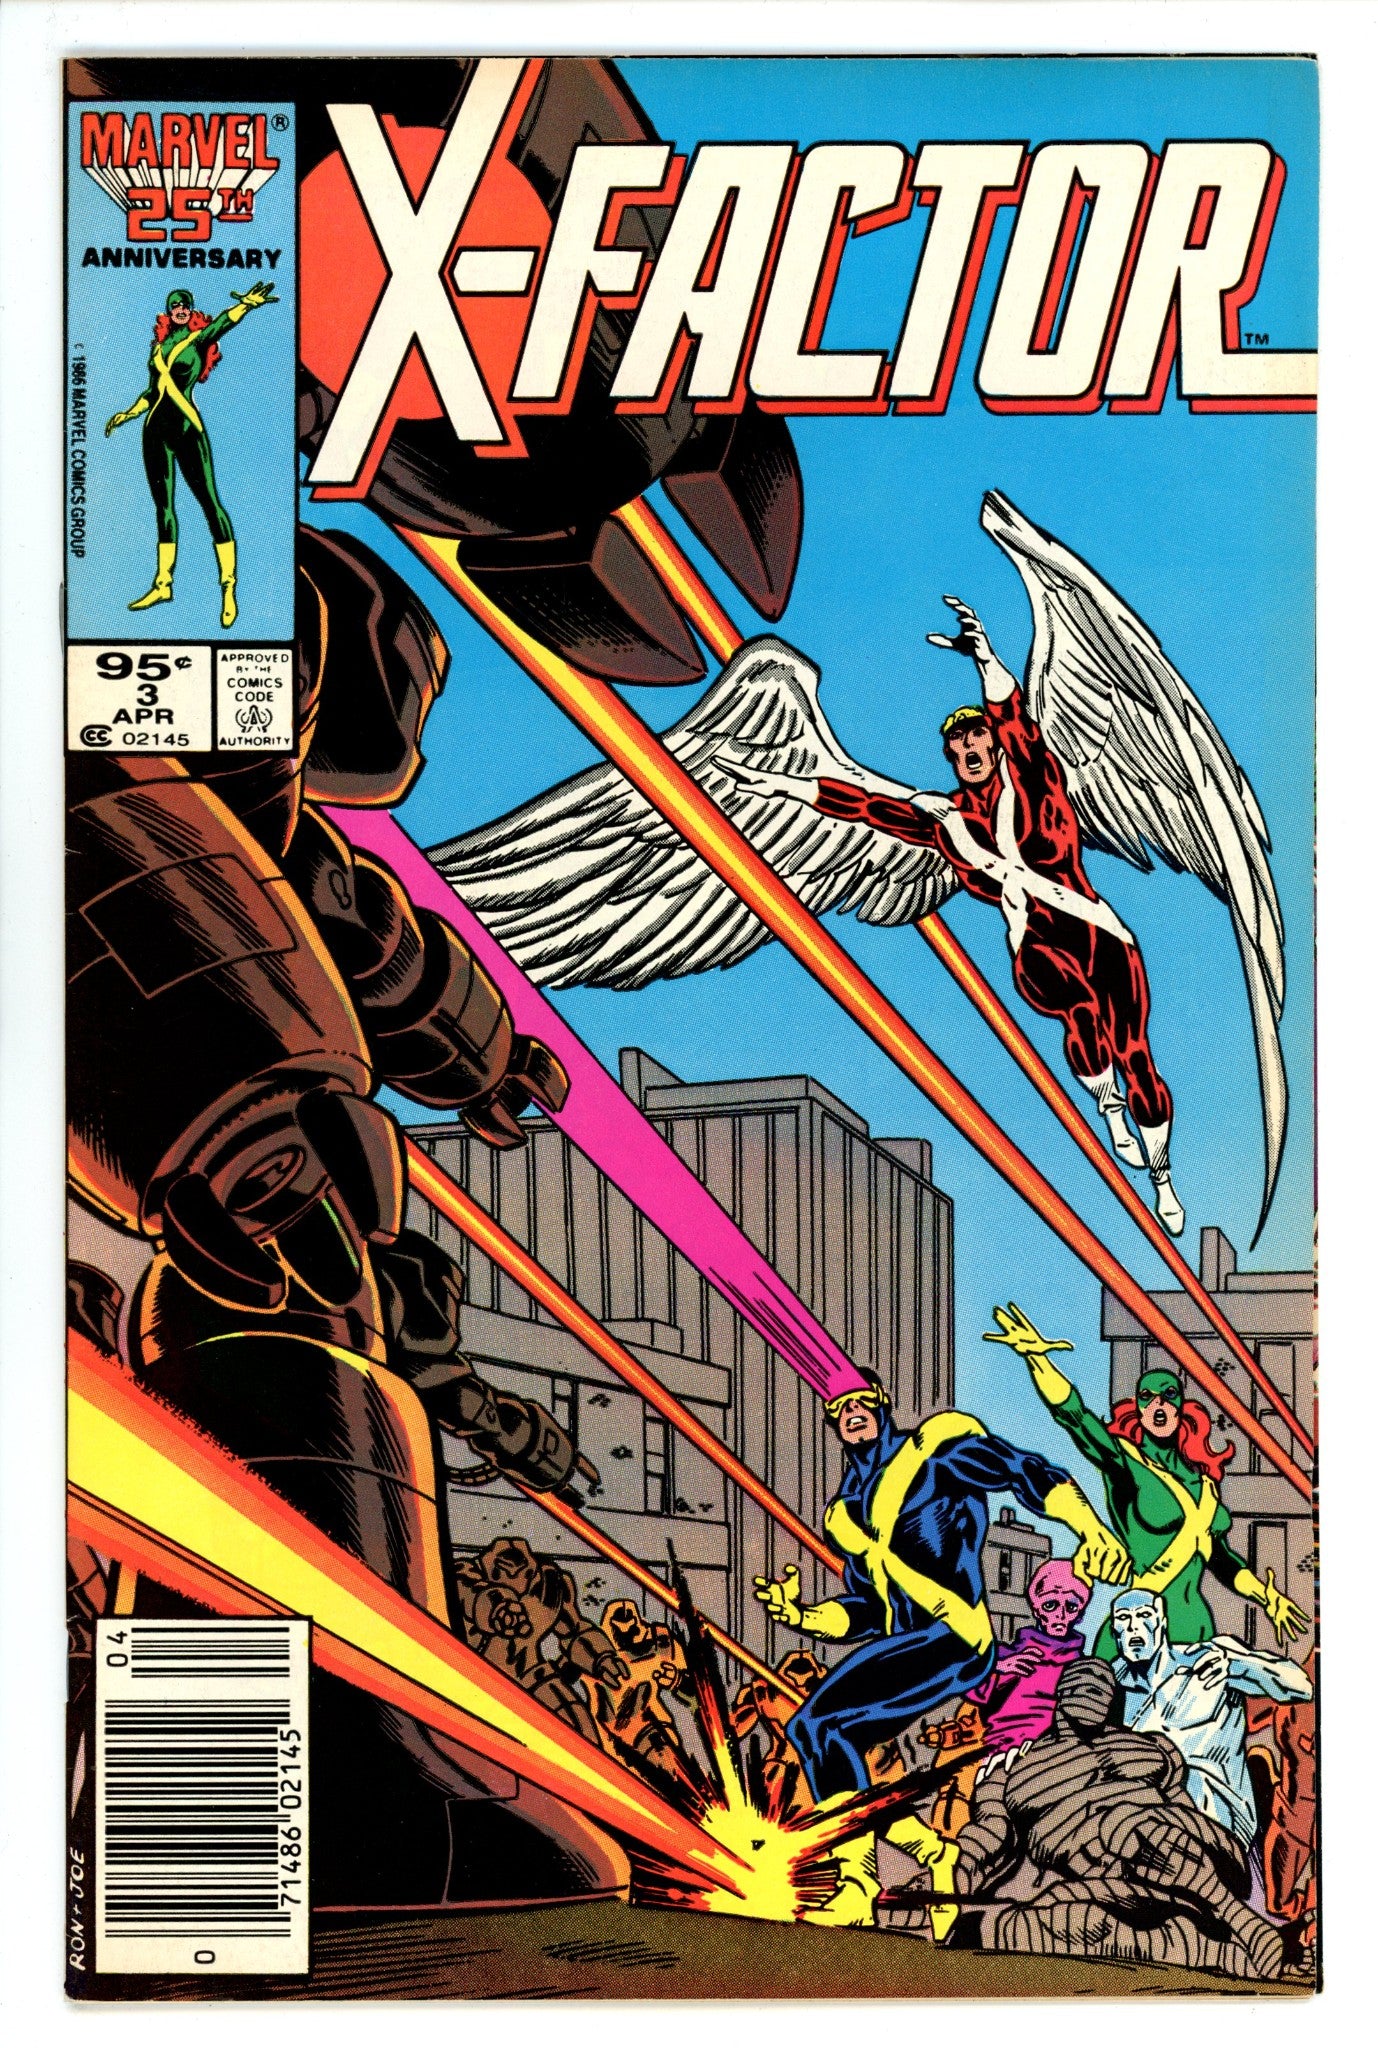 X-Factor Vol 1 3 FN- (5.5) (1986) Canadian Price Variant 